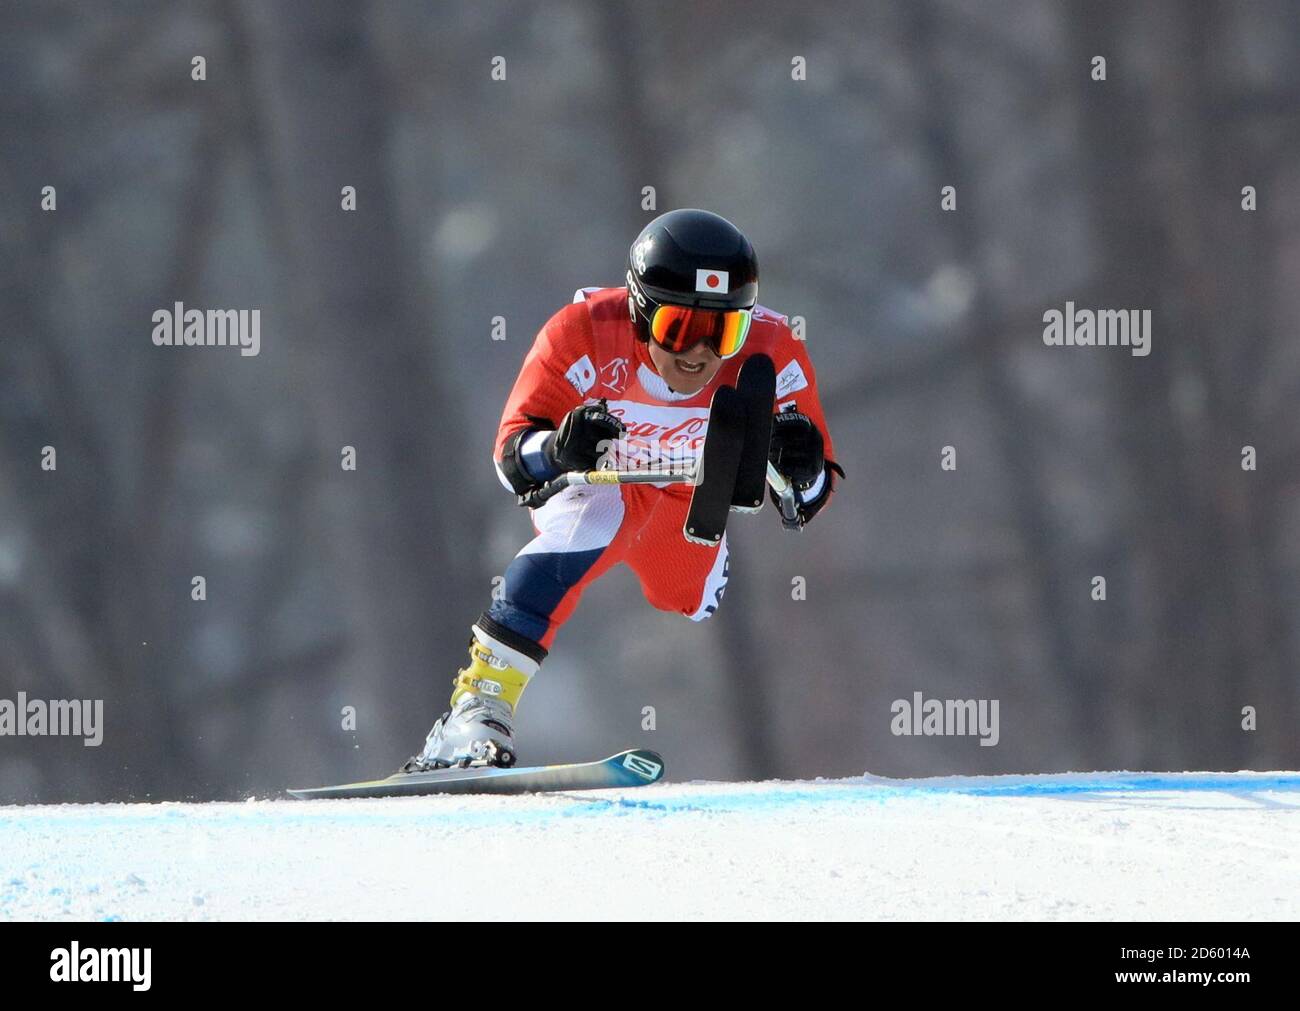 Japan's Hiraku Misawa in the Men's Downhill, Standin during day one of the PyeongChang 2018 Winter Paralympics in South Korea Stock Photo